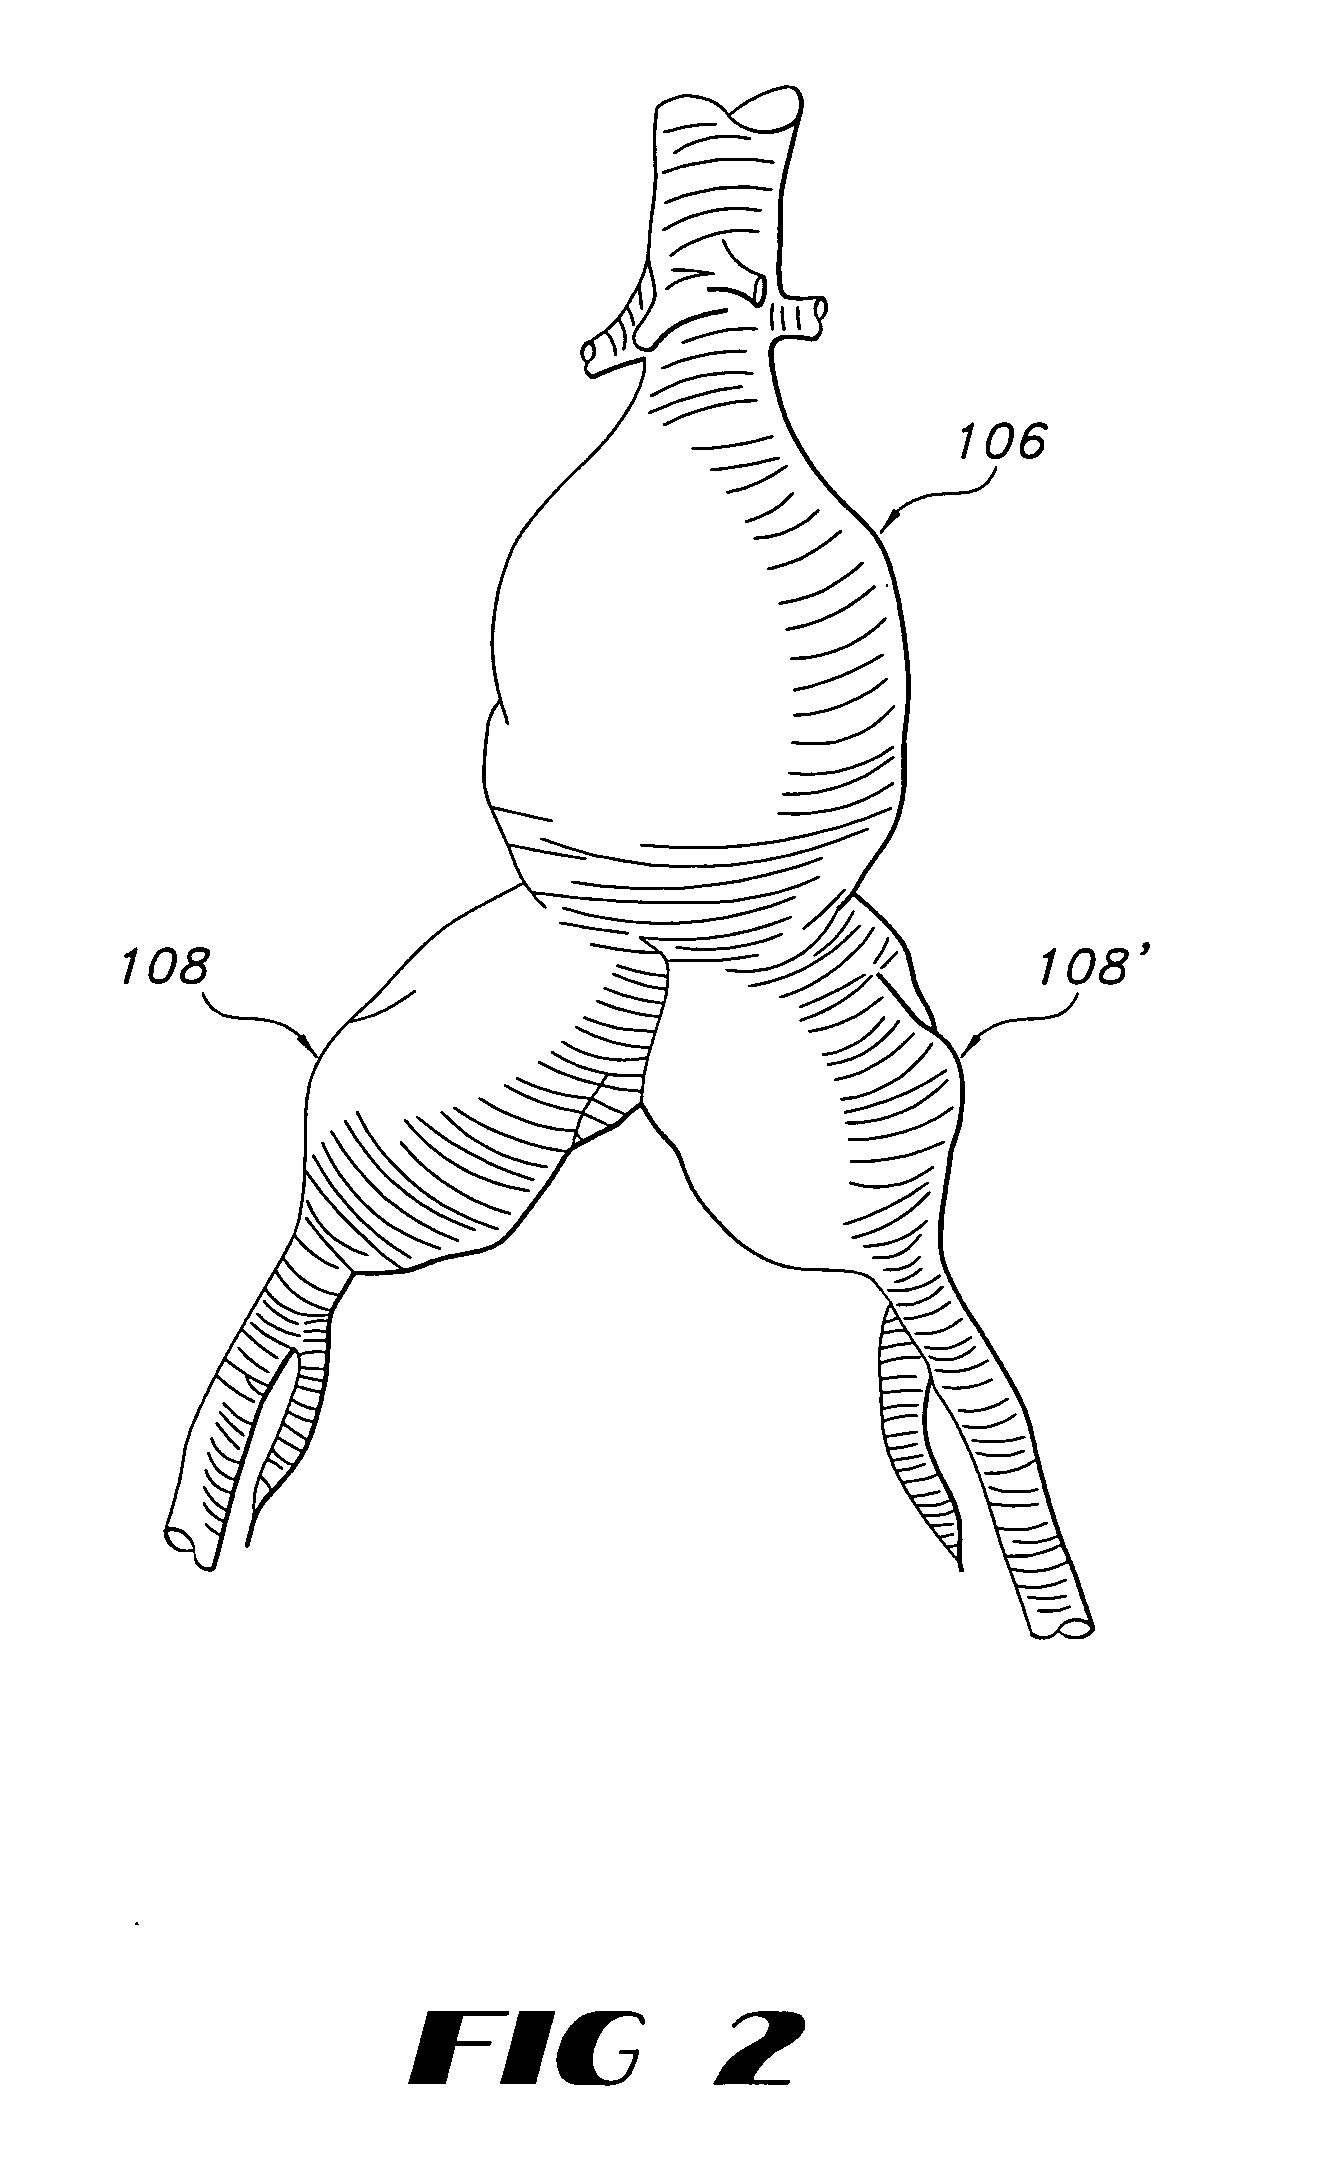 Endovascular prosthetic devices having hook and loop structures